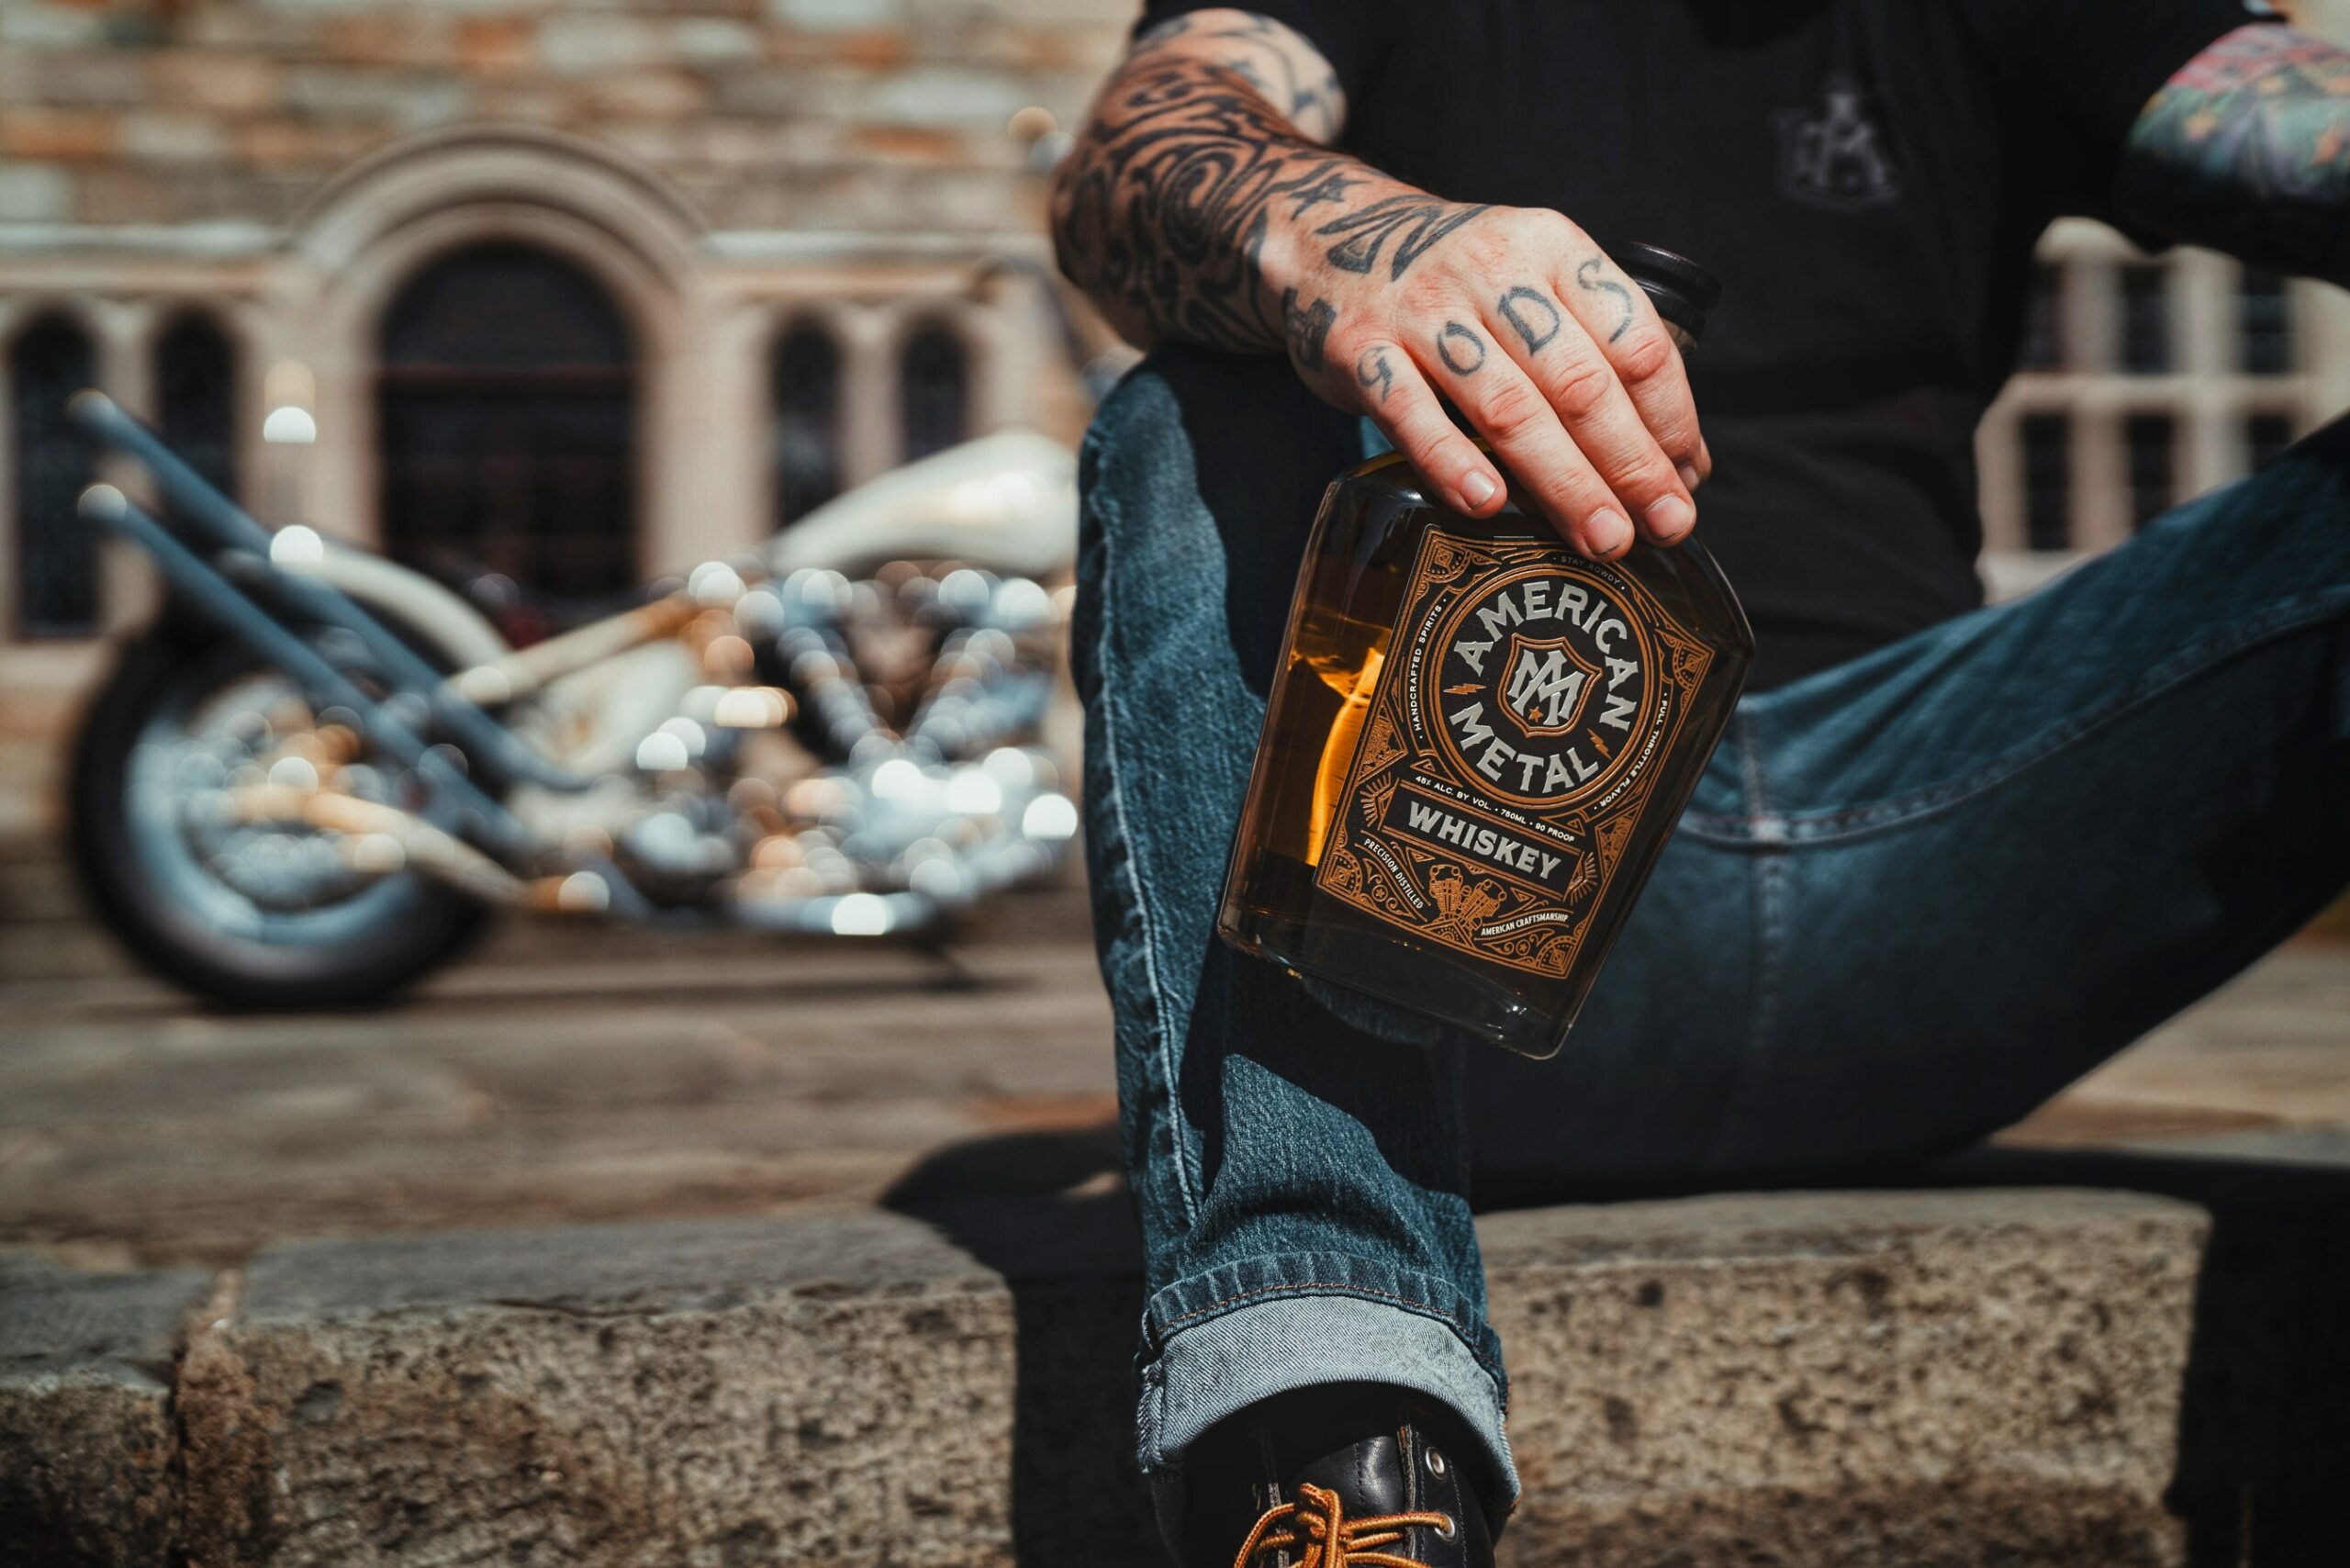 American Metal Launches New Whiskey for Motorcycle & Hot Rod Enthusiasts